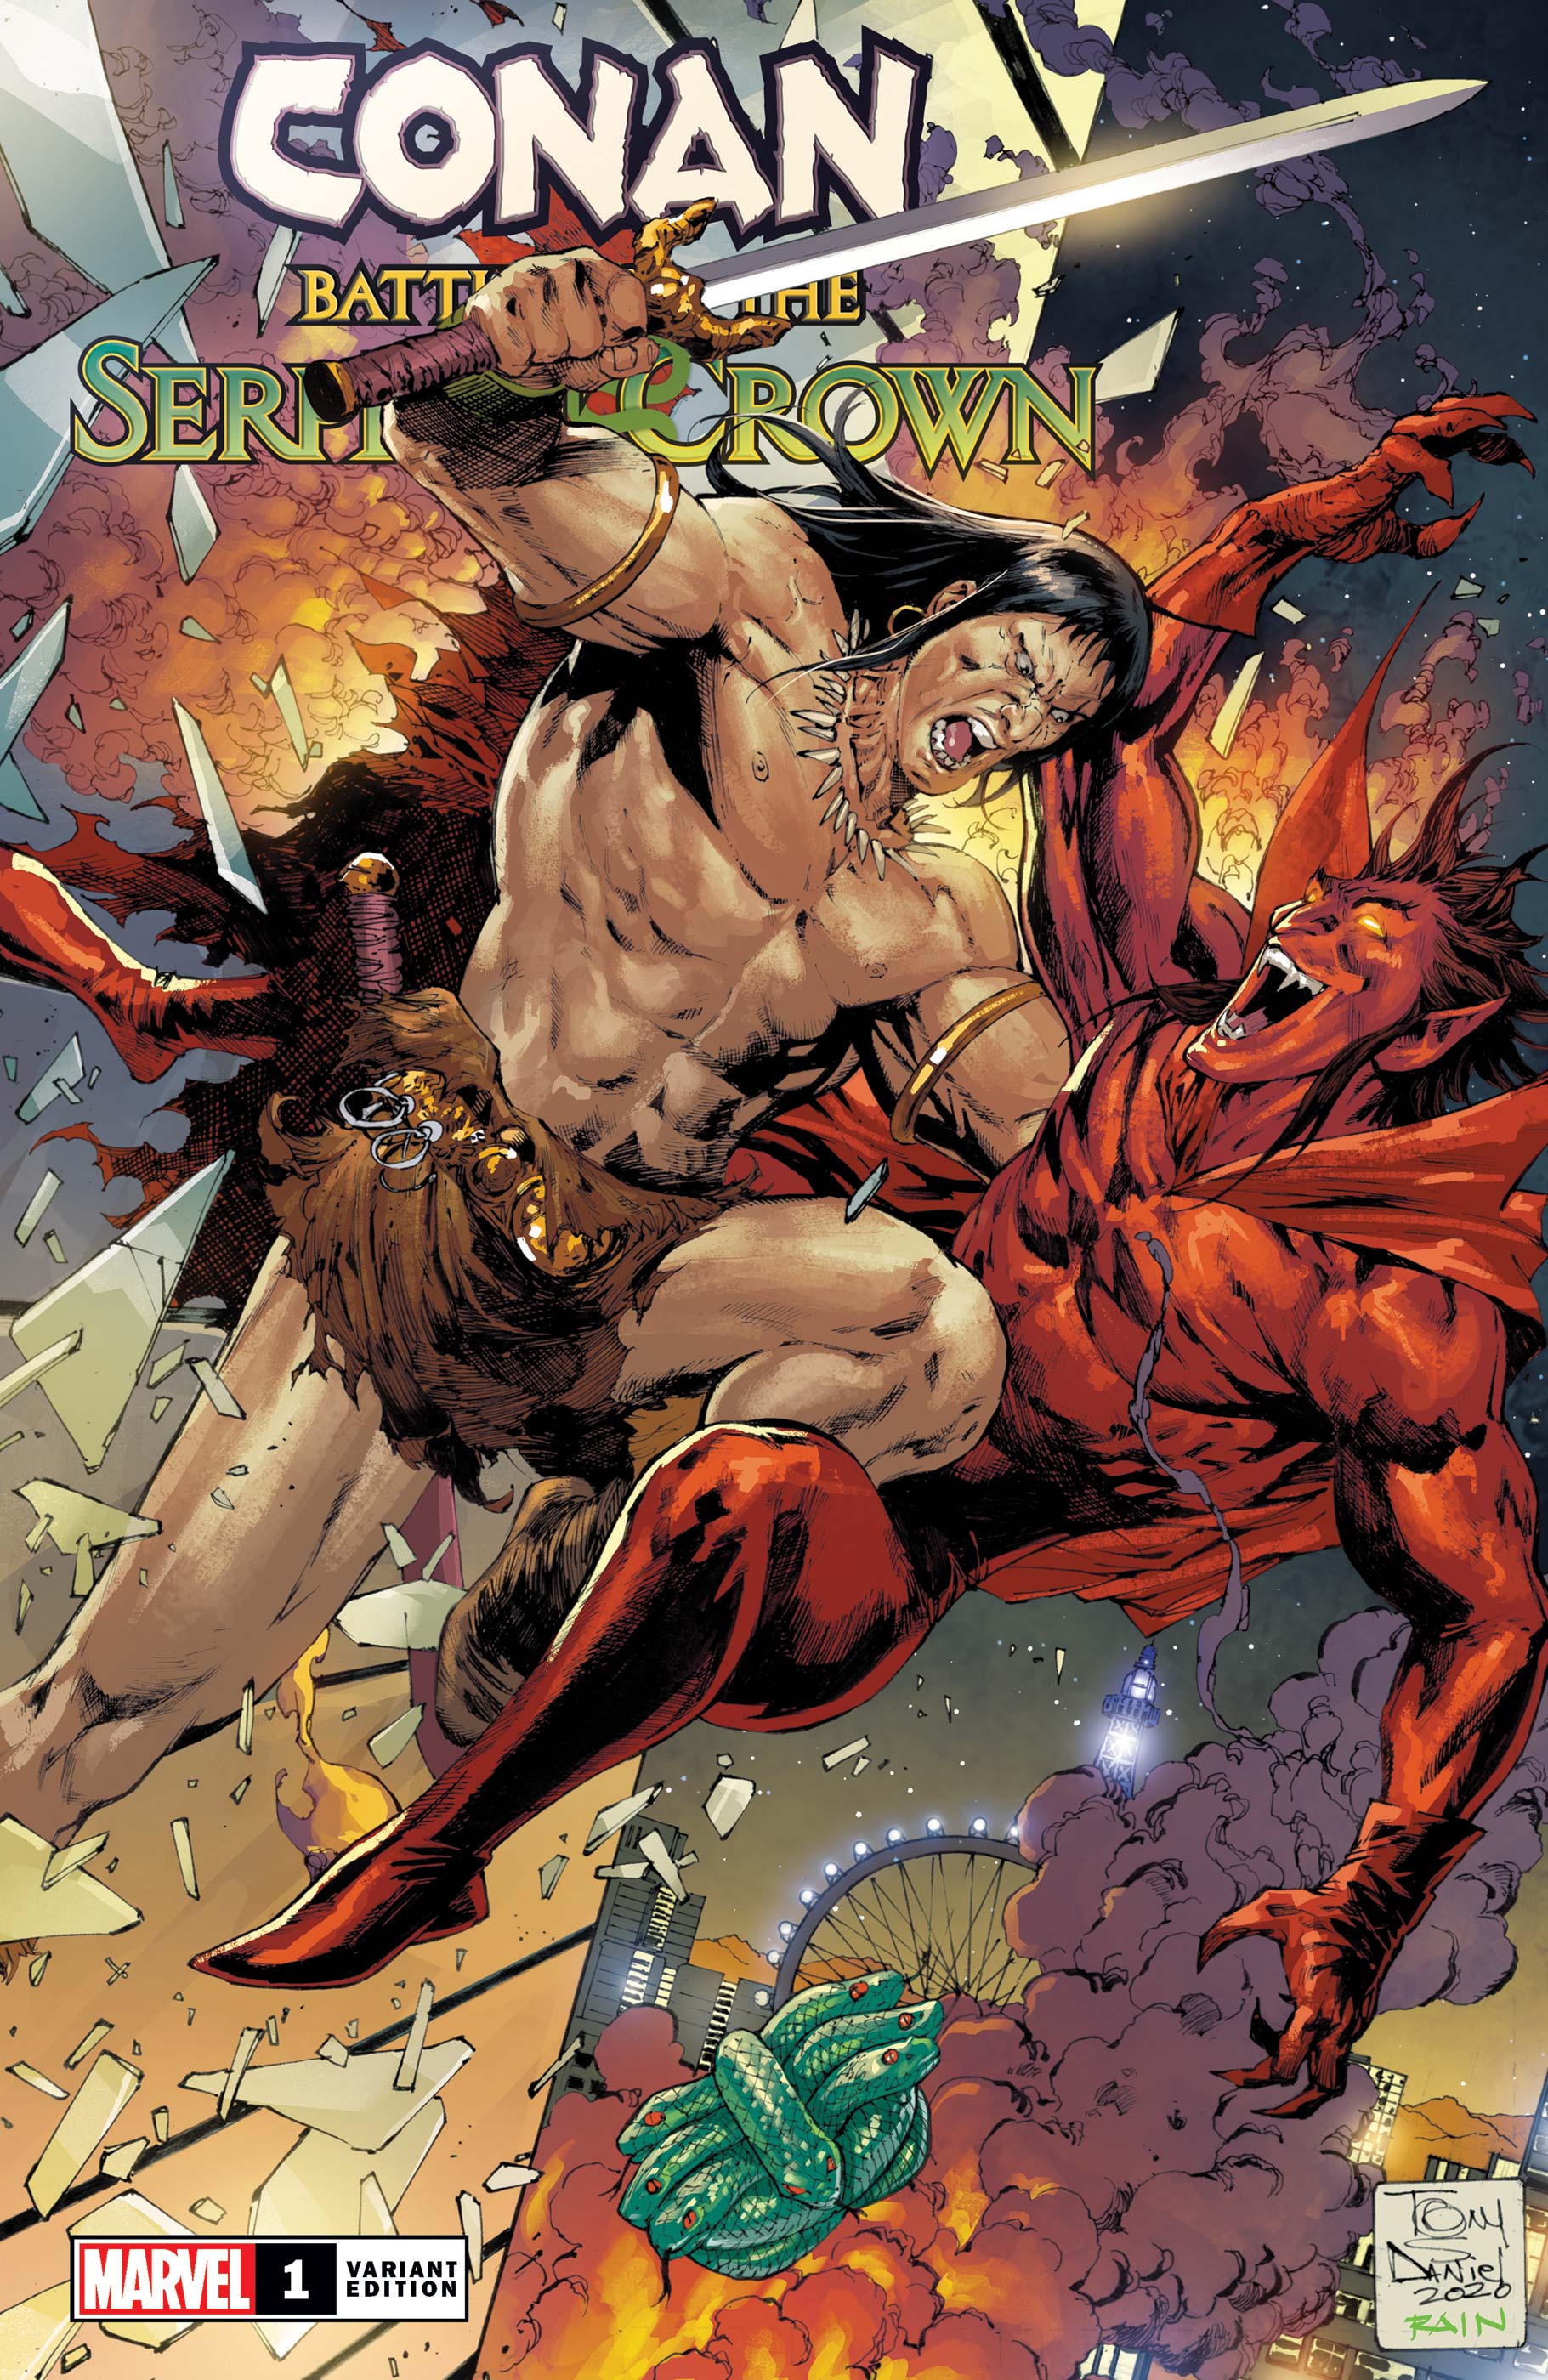 Conan: Battle for the Serpent Crown (2020) #1 (Variant)